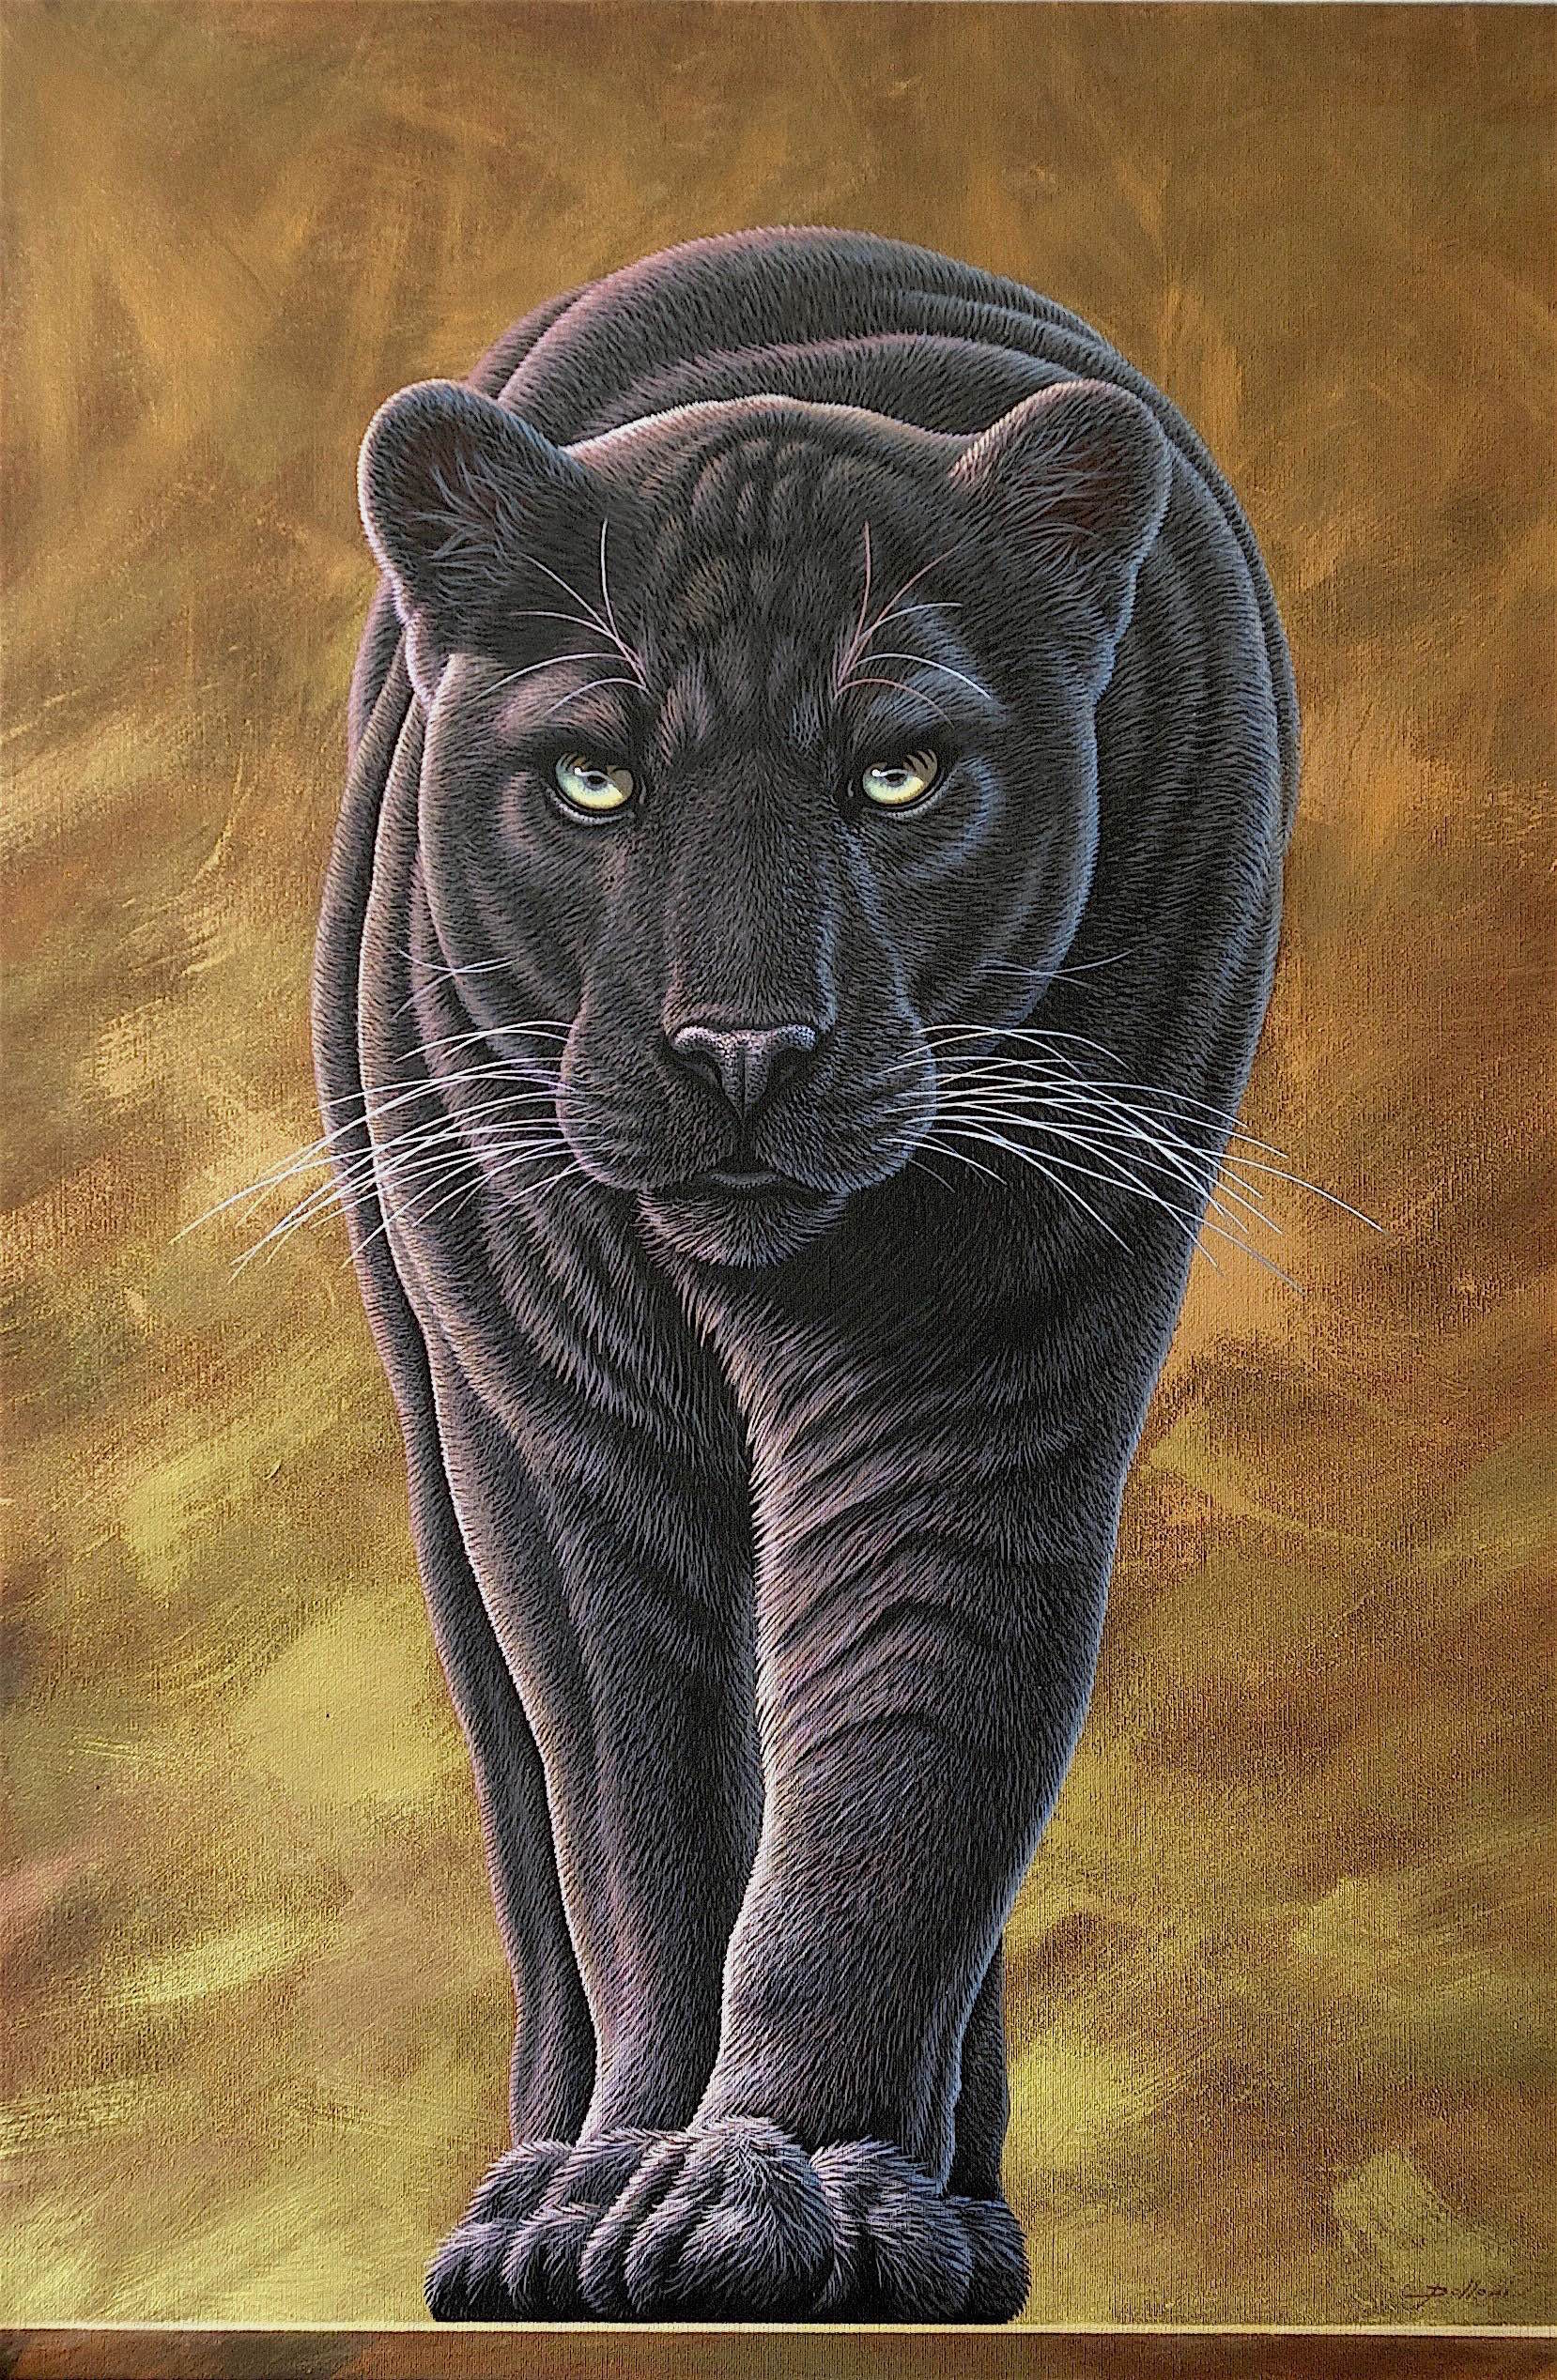 "Black panther" - inches 35x24 - Polloni Saverio